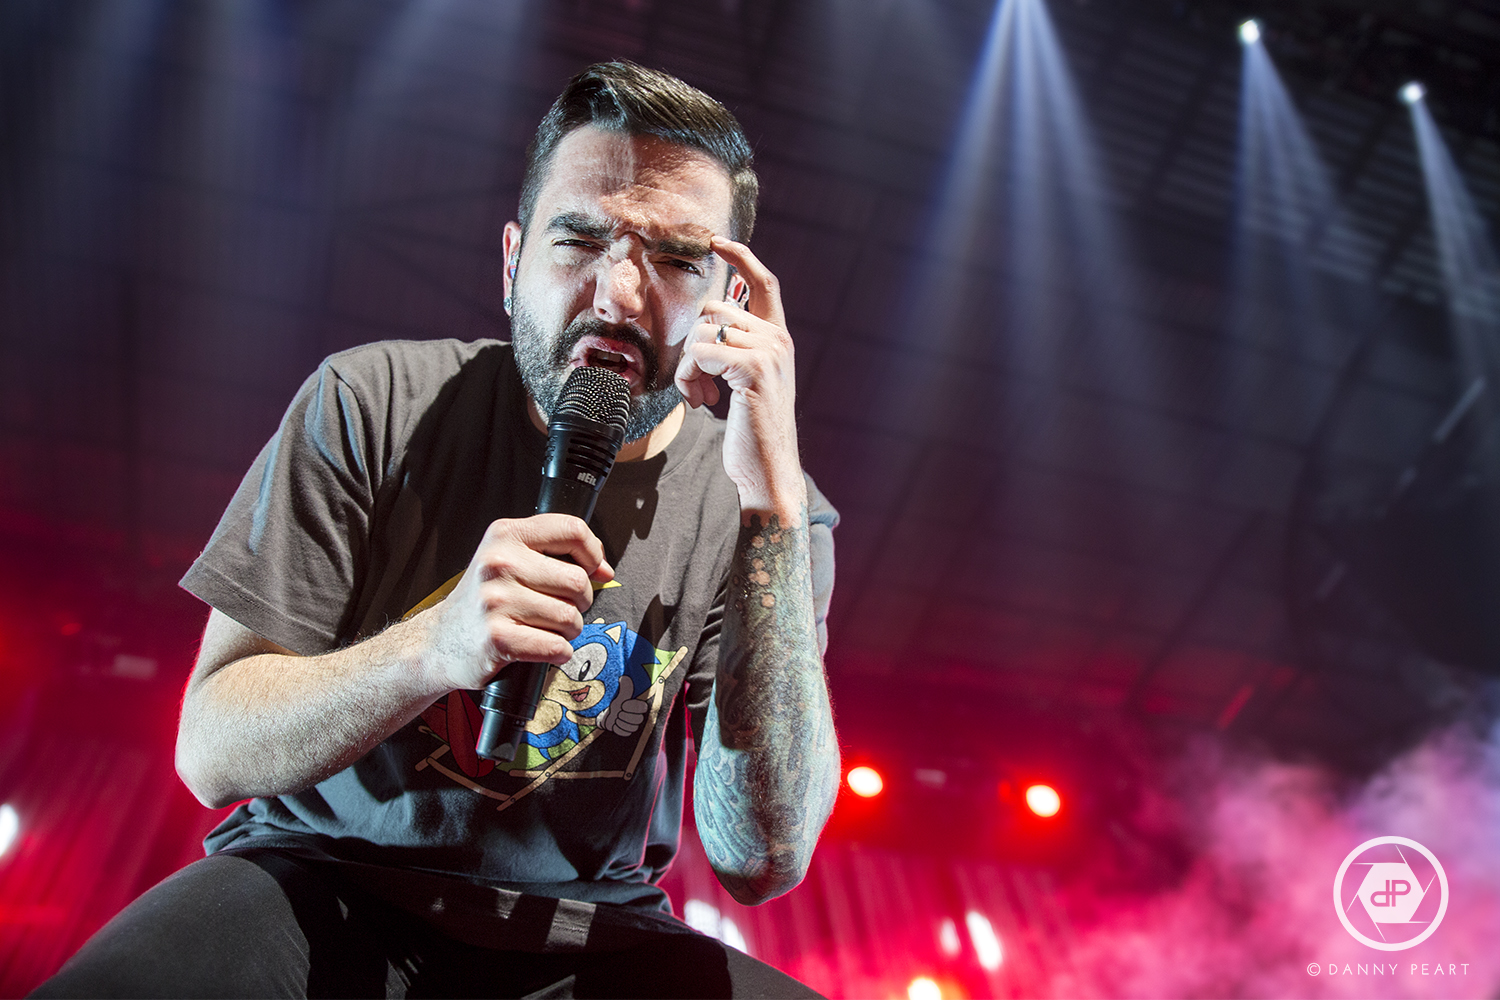 A Day To Remember and guest are right back at it again at Leeds Arena!